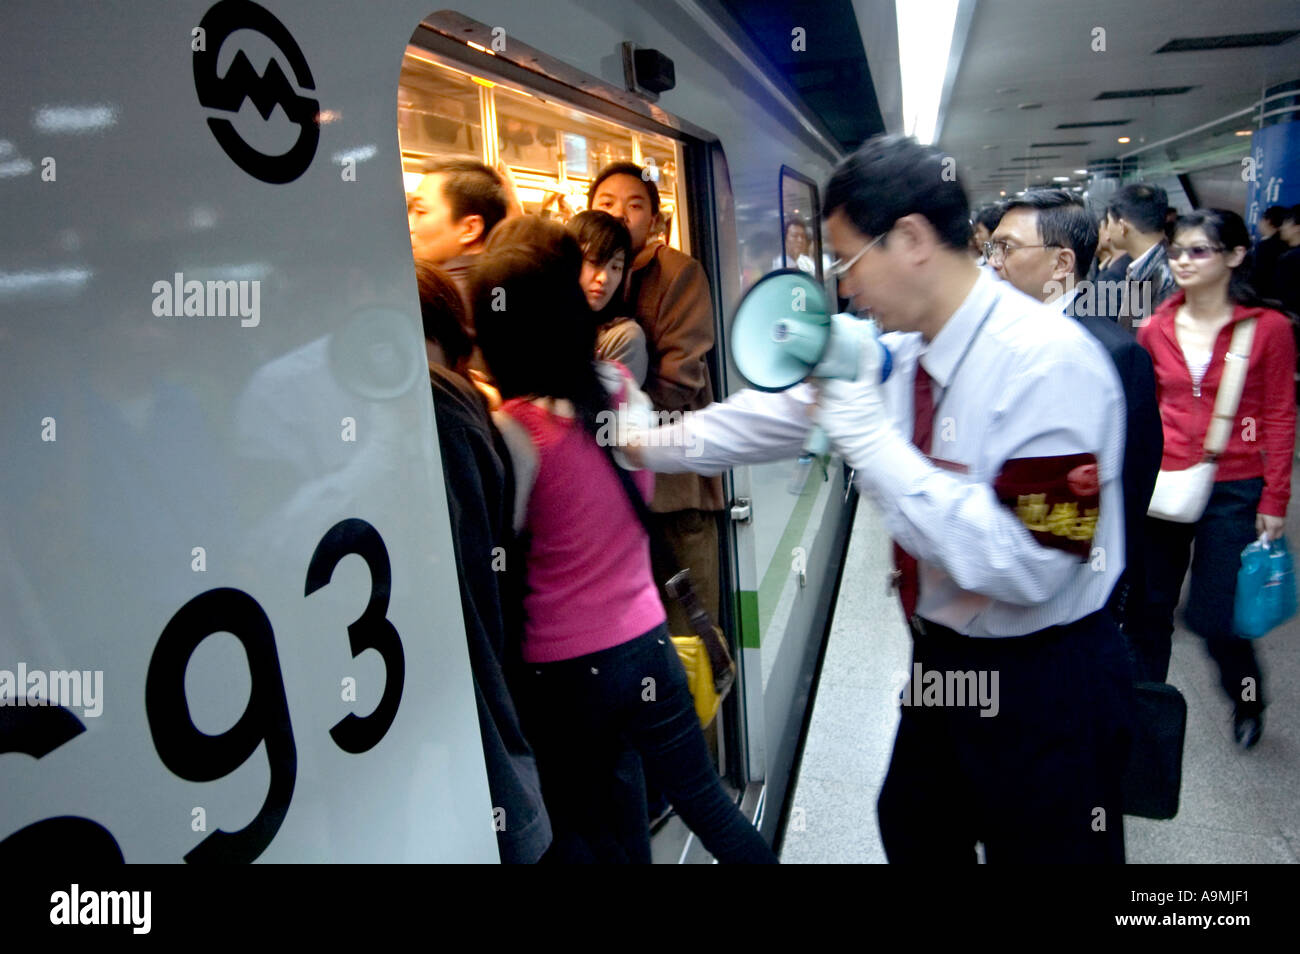 MAN WITH MEGAPHONE PUSH COMMUTERS INTO CROWDED TRAIN SO DOORS WILL CLOSE  RUSH HOUR AT PEOPLE S SQUARE SHANGHAI CHINA Stock Photo - Alamy